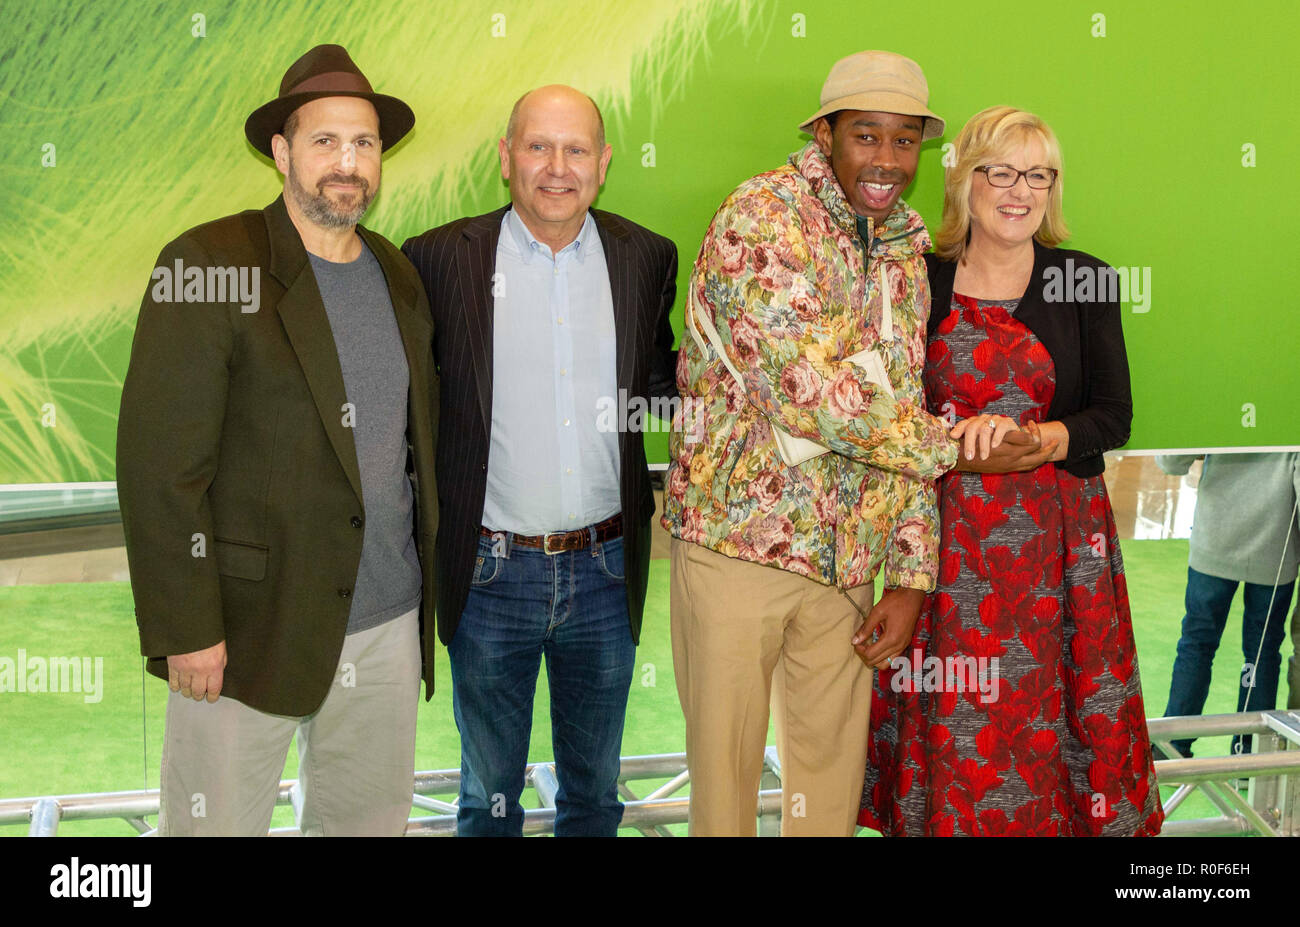 New York, NY, USA. 3rd November, 2018. (L-R) Writer Tommy Swerdlow, producer Chris Meledandri, and musician Tyler, the Creator, and producer Janet Healy attend the world premiere of Dr Seuss’s “The Grinch' at Alice Tully Hall in New York City on November 3, 2018. Credit: Jeremy Burke/Alamy Live News Stock Photo